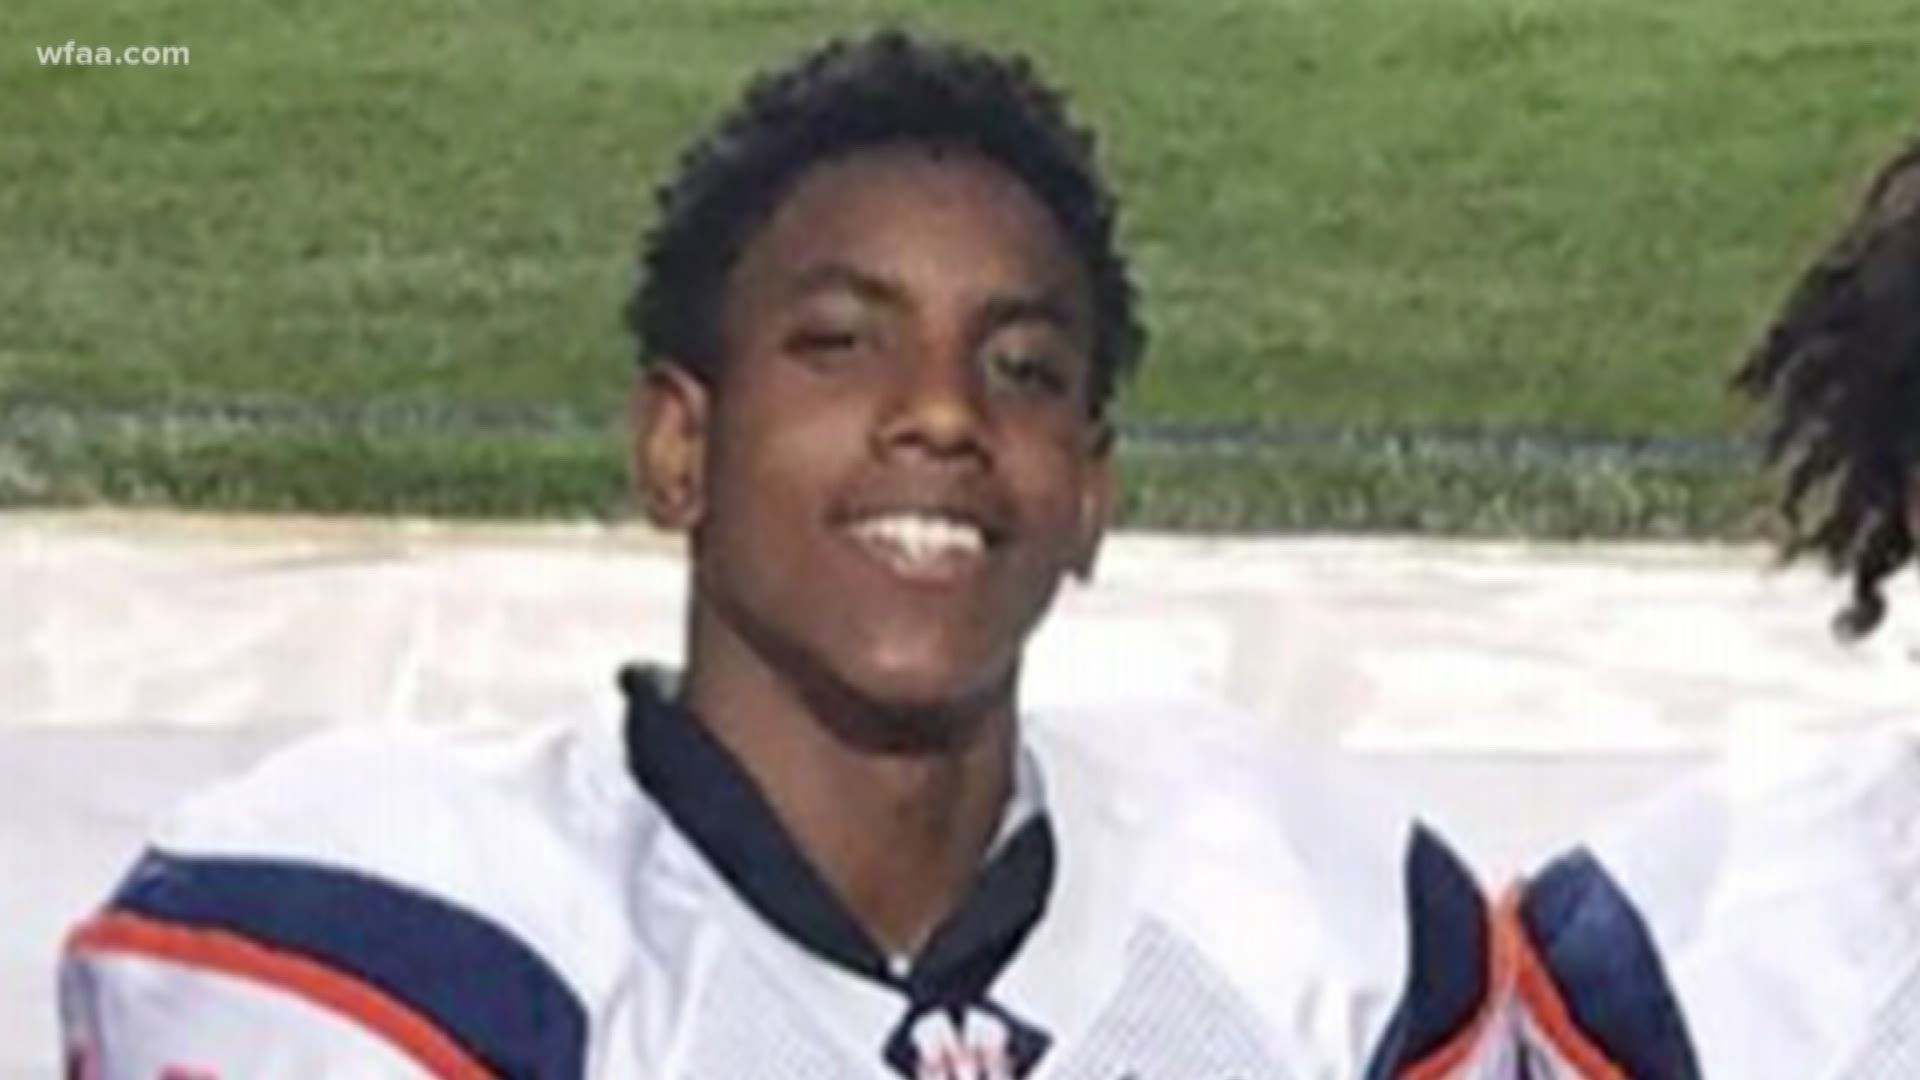 Ira Hill and his older son have "endured a lot in recent years." Now, the McKinney community has shown up in multiple ways to show their support for the Hill family.